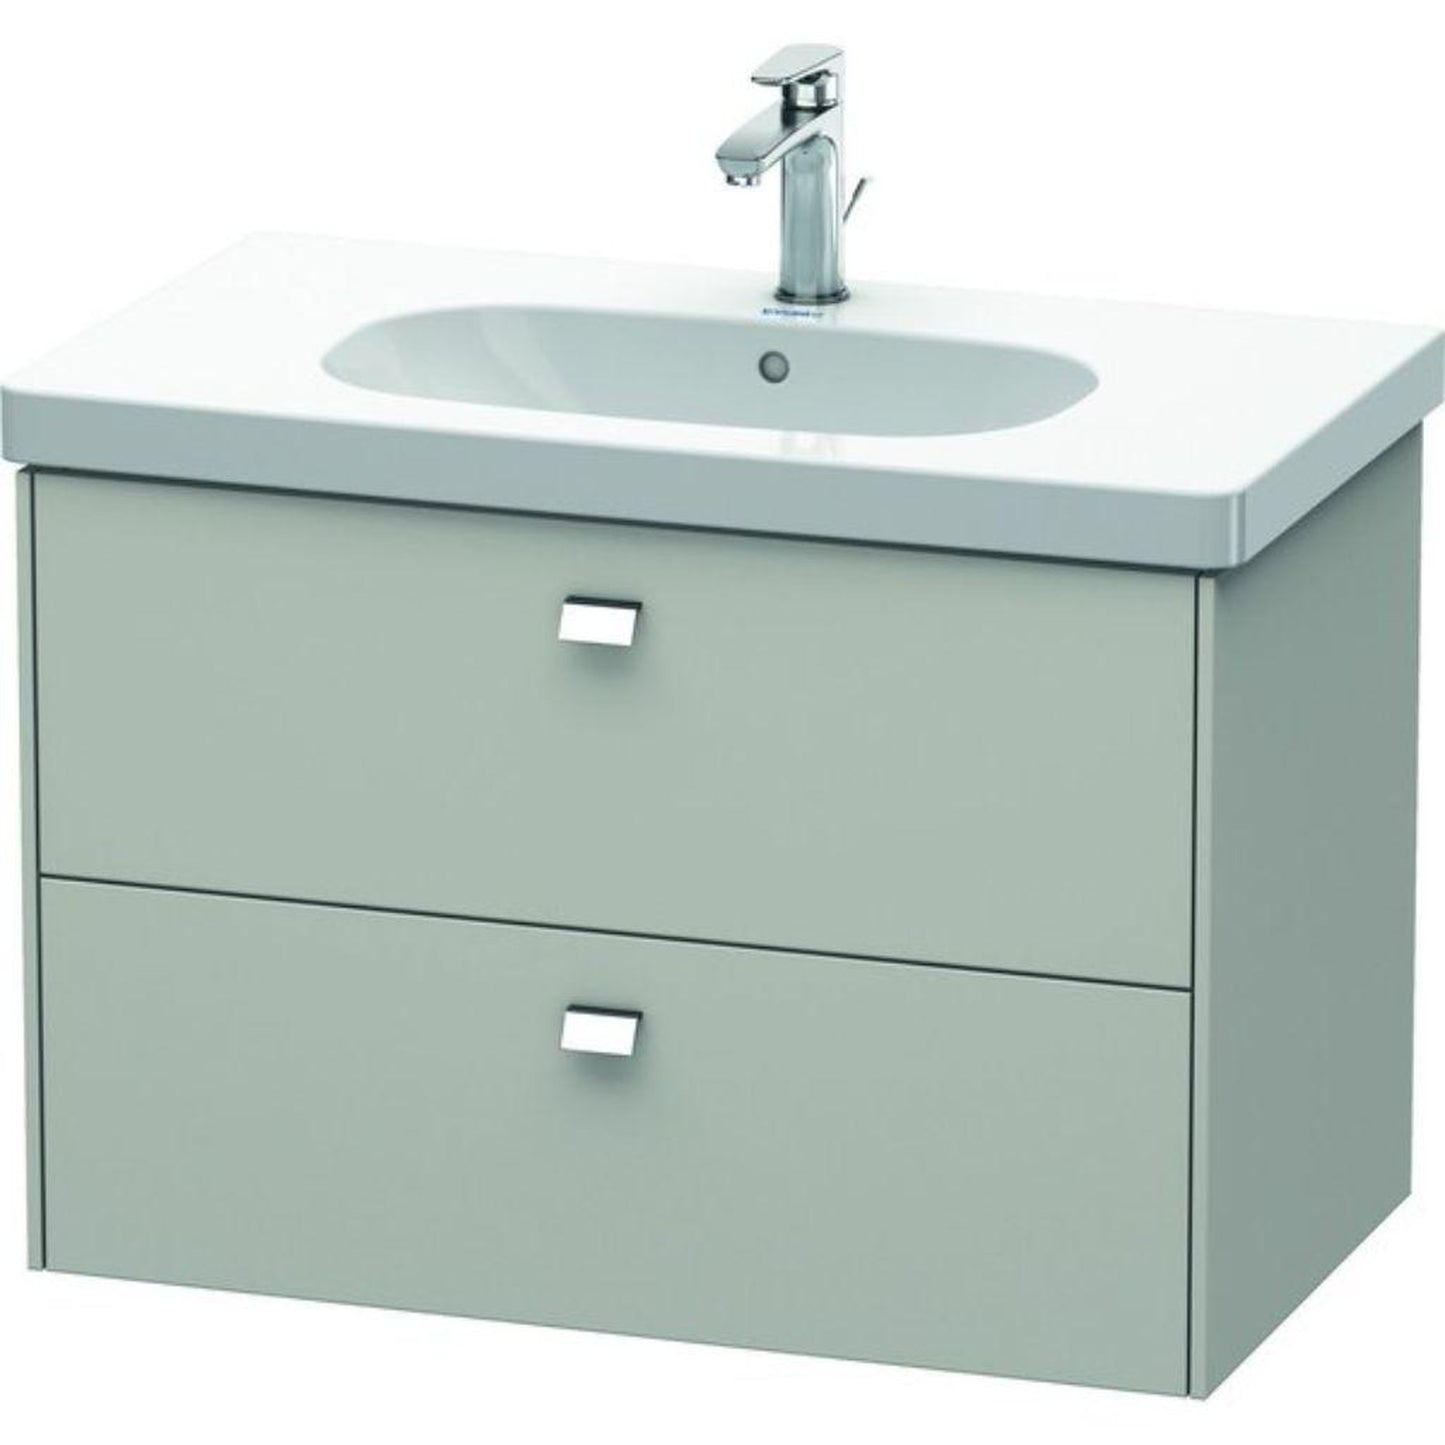 Duravit Brioso BR41460 32" x 22" x 18" Two Drawer Wall-Mount Vanity Unit in Concrete Grey Matt and Chrome Handle